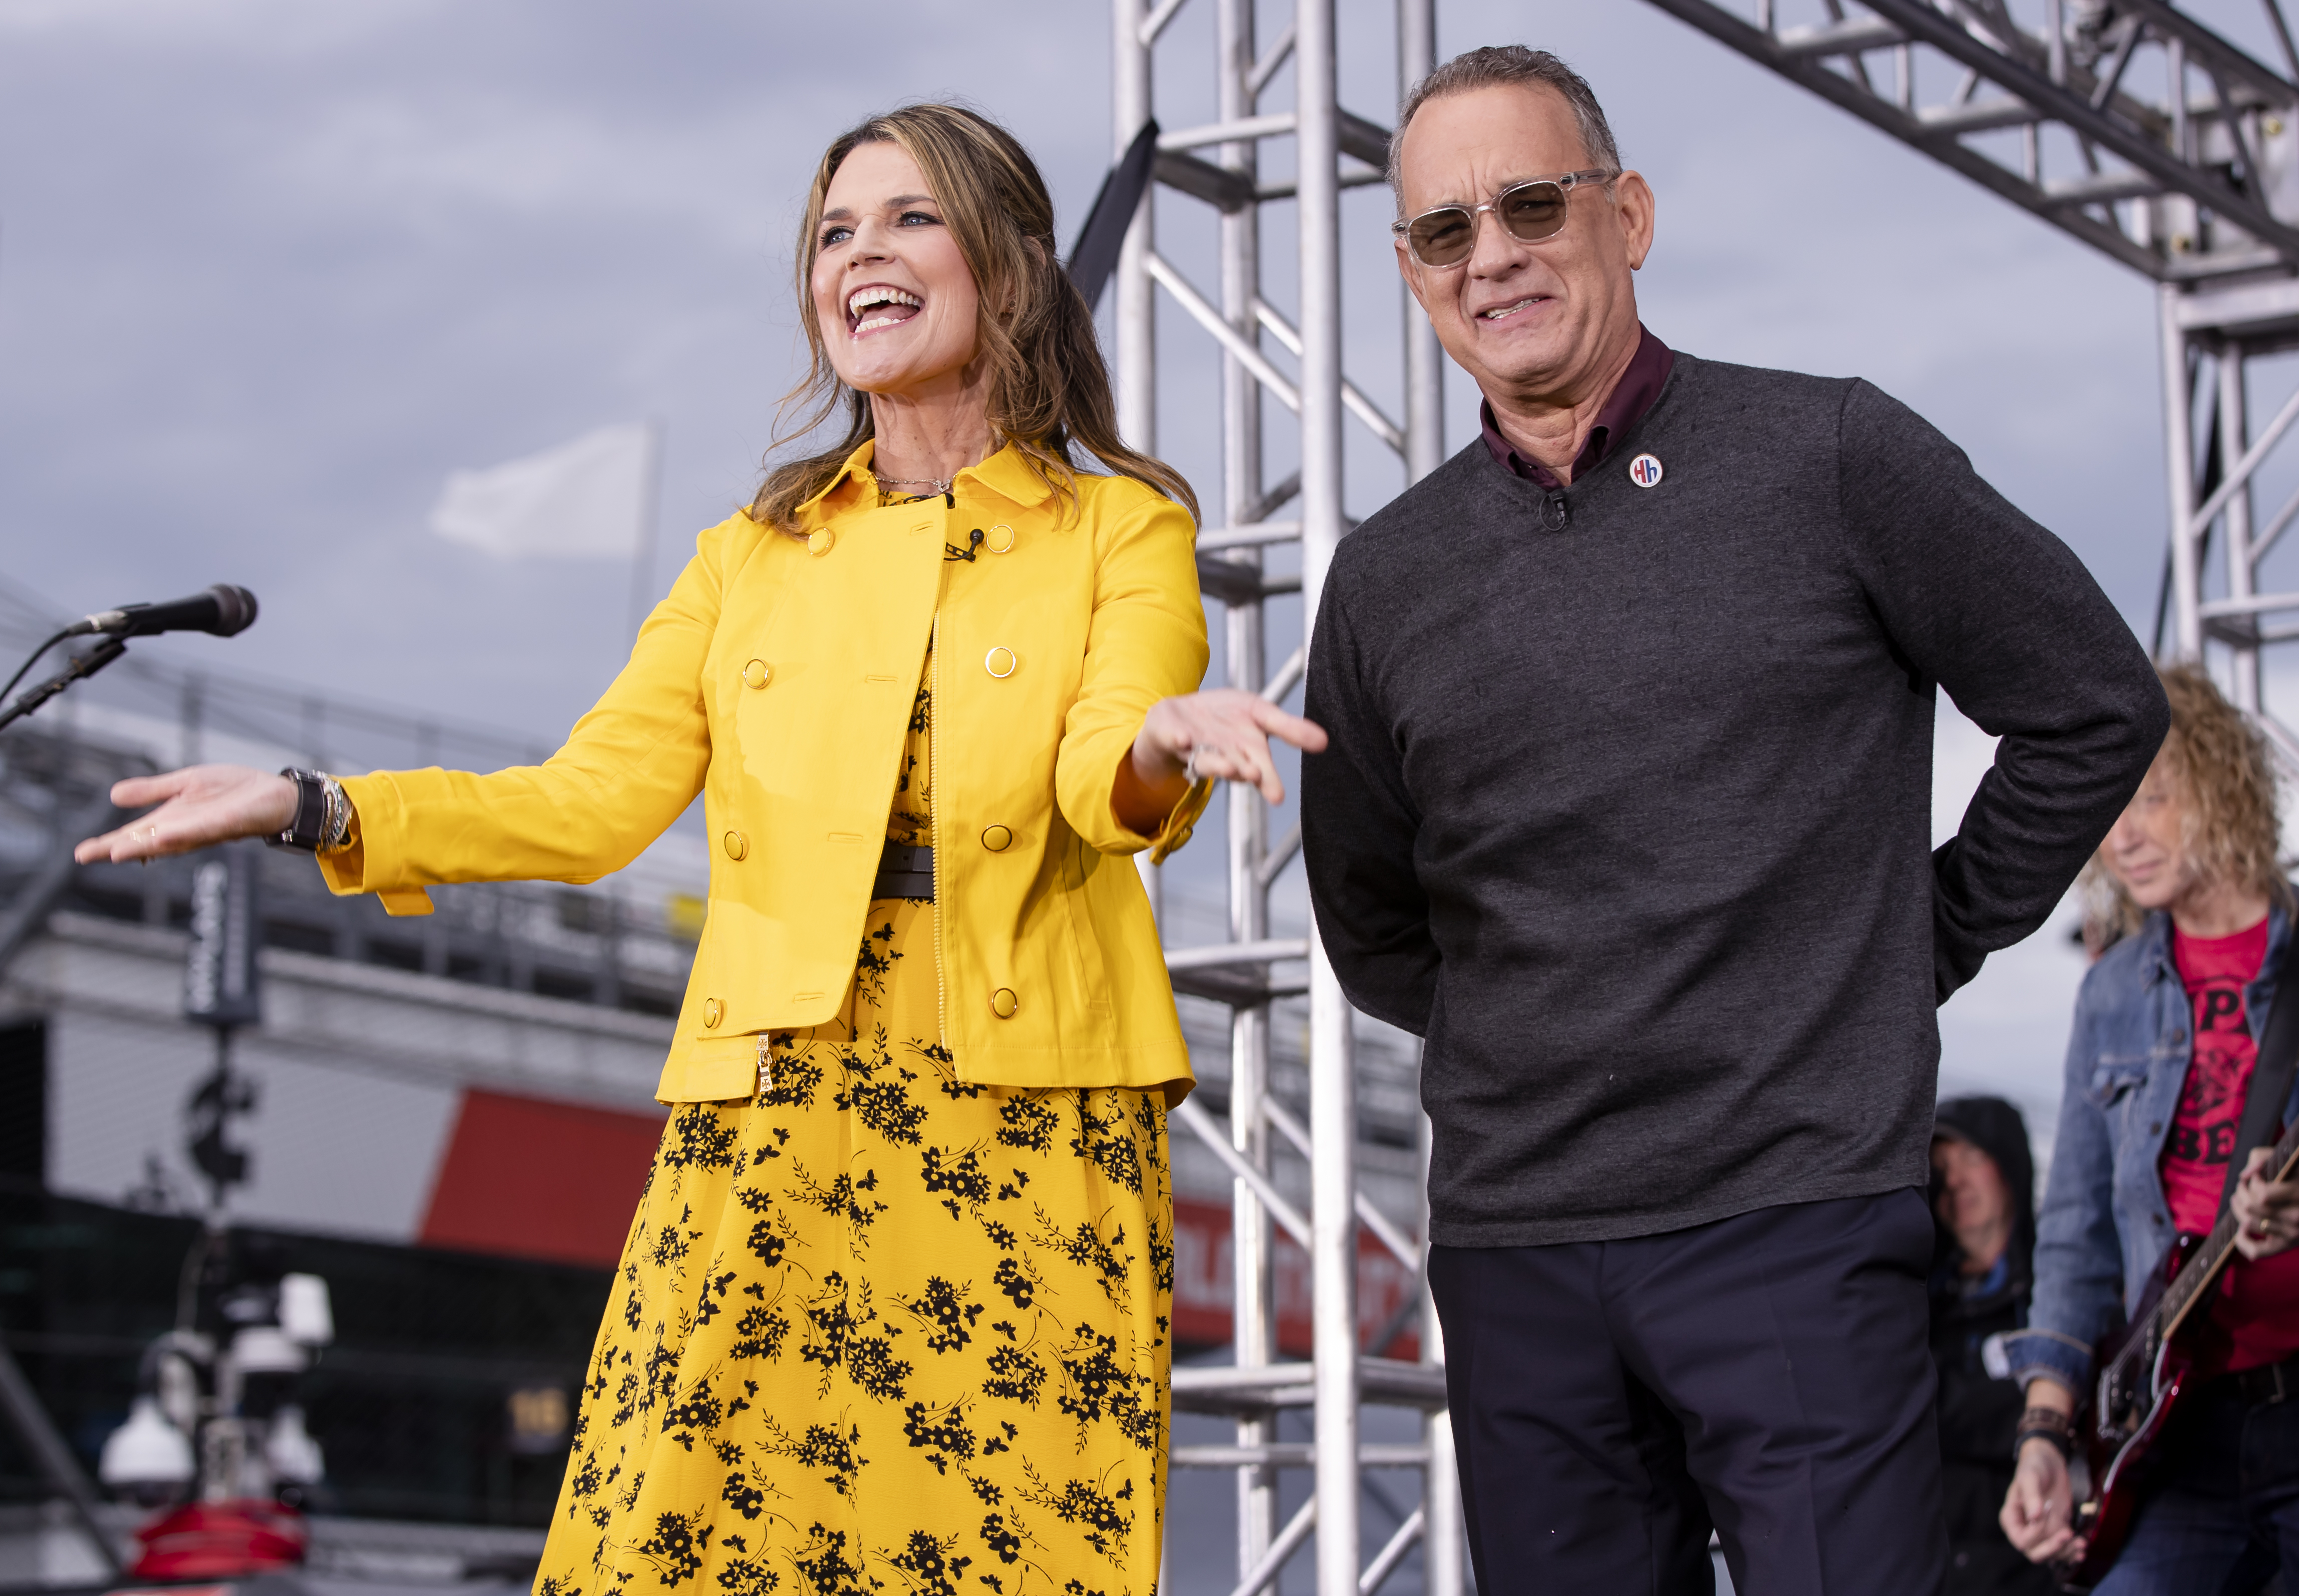 Dylan shared a sweet off-camera story about meeting Tom Hanks (pictured here with Savannah Guthrie) on Today when she was pregnant with her first child